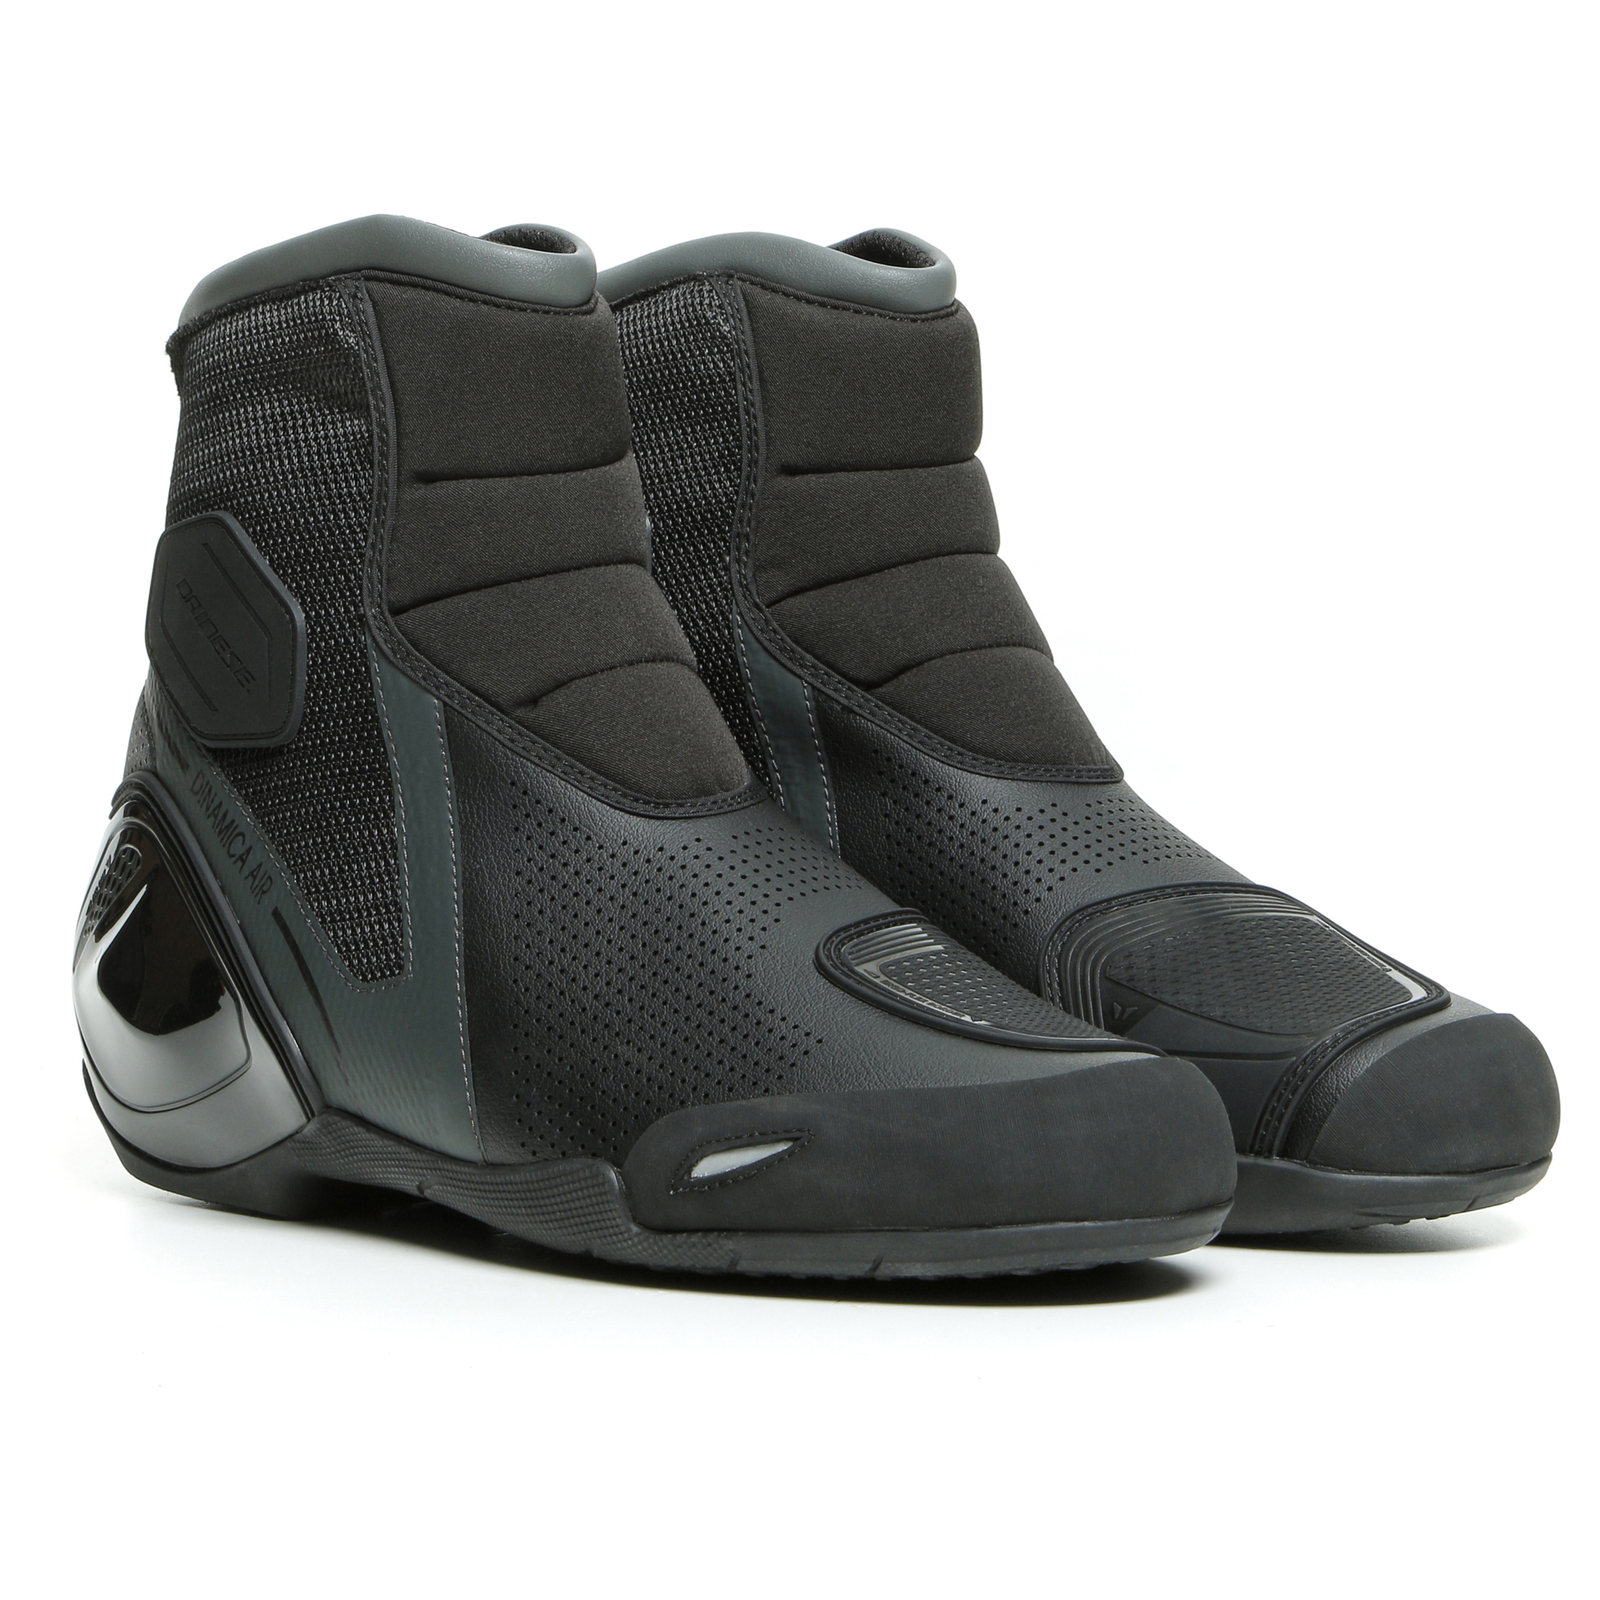 DINAMICA AIR SHOES BLACK/ANTHRACITE/41